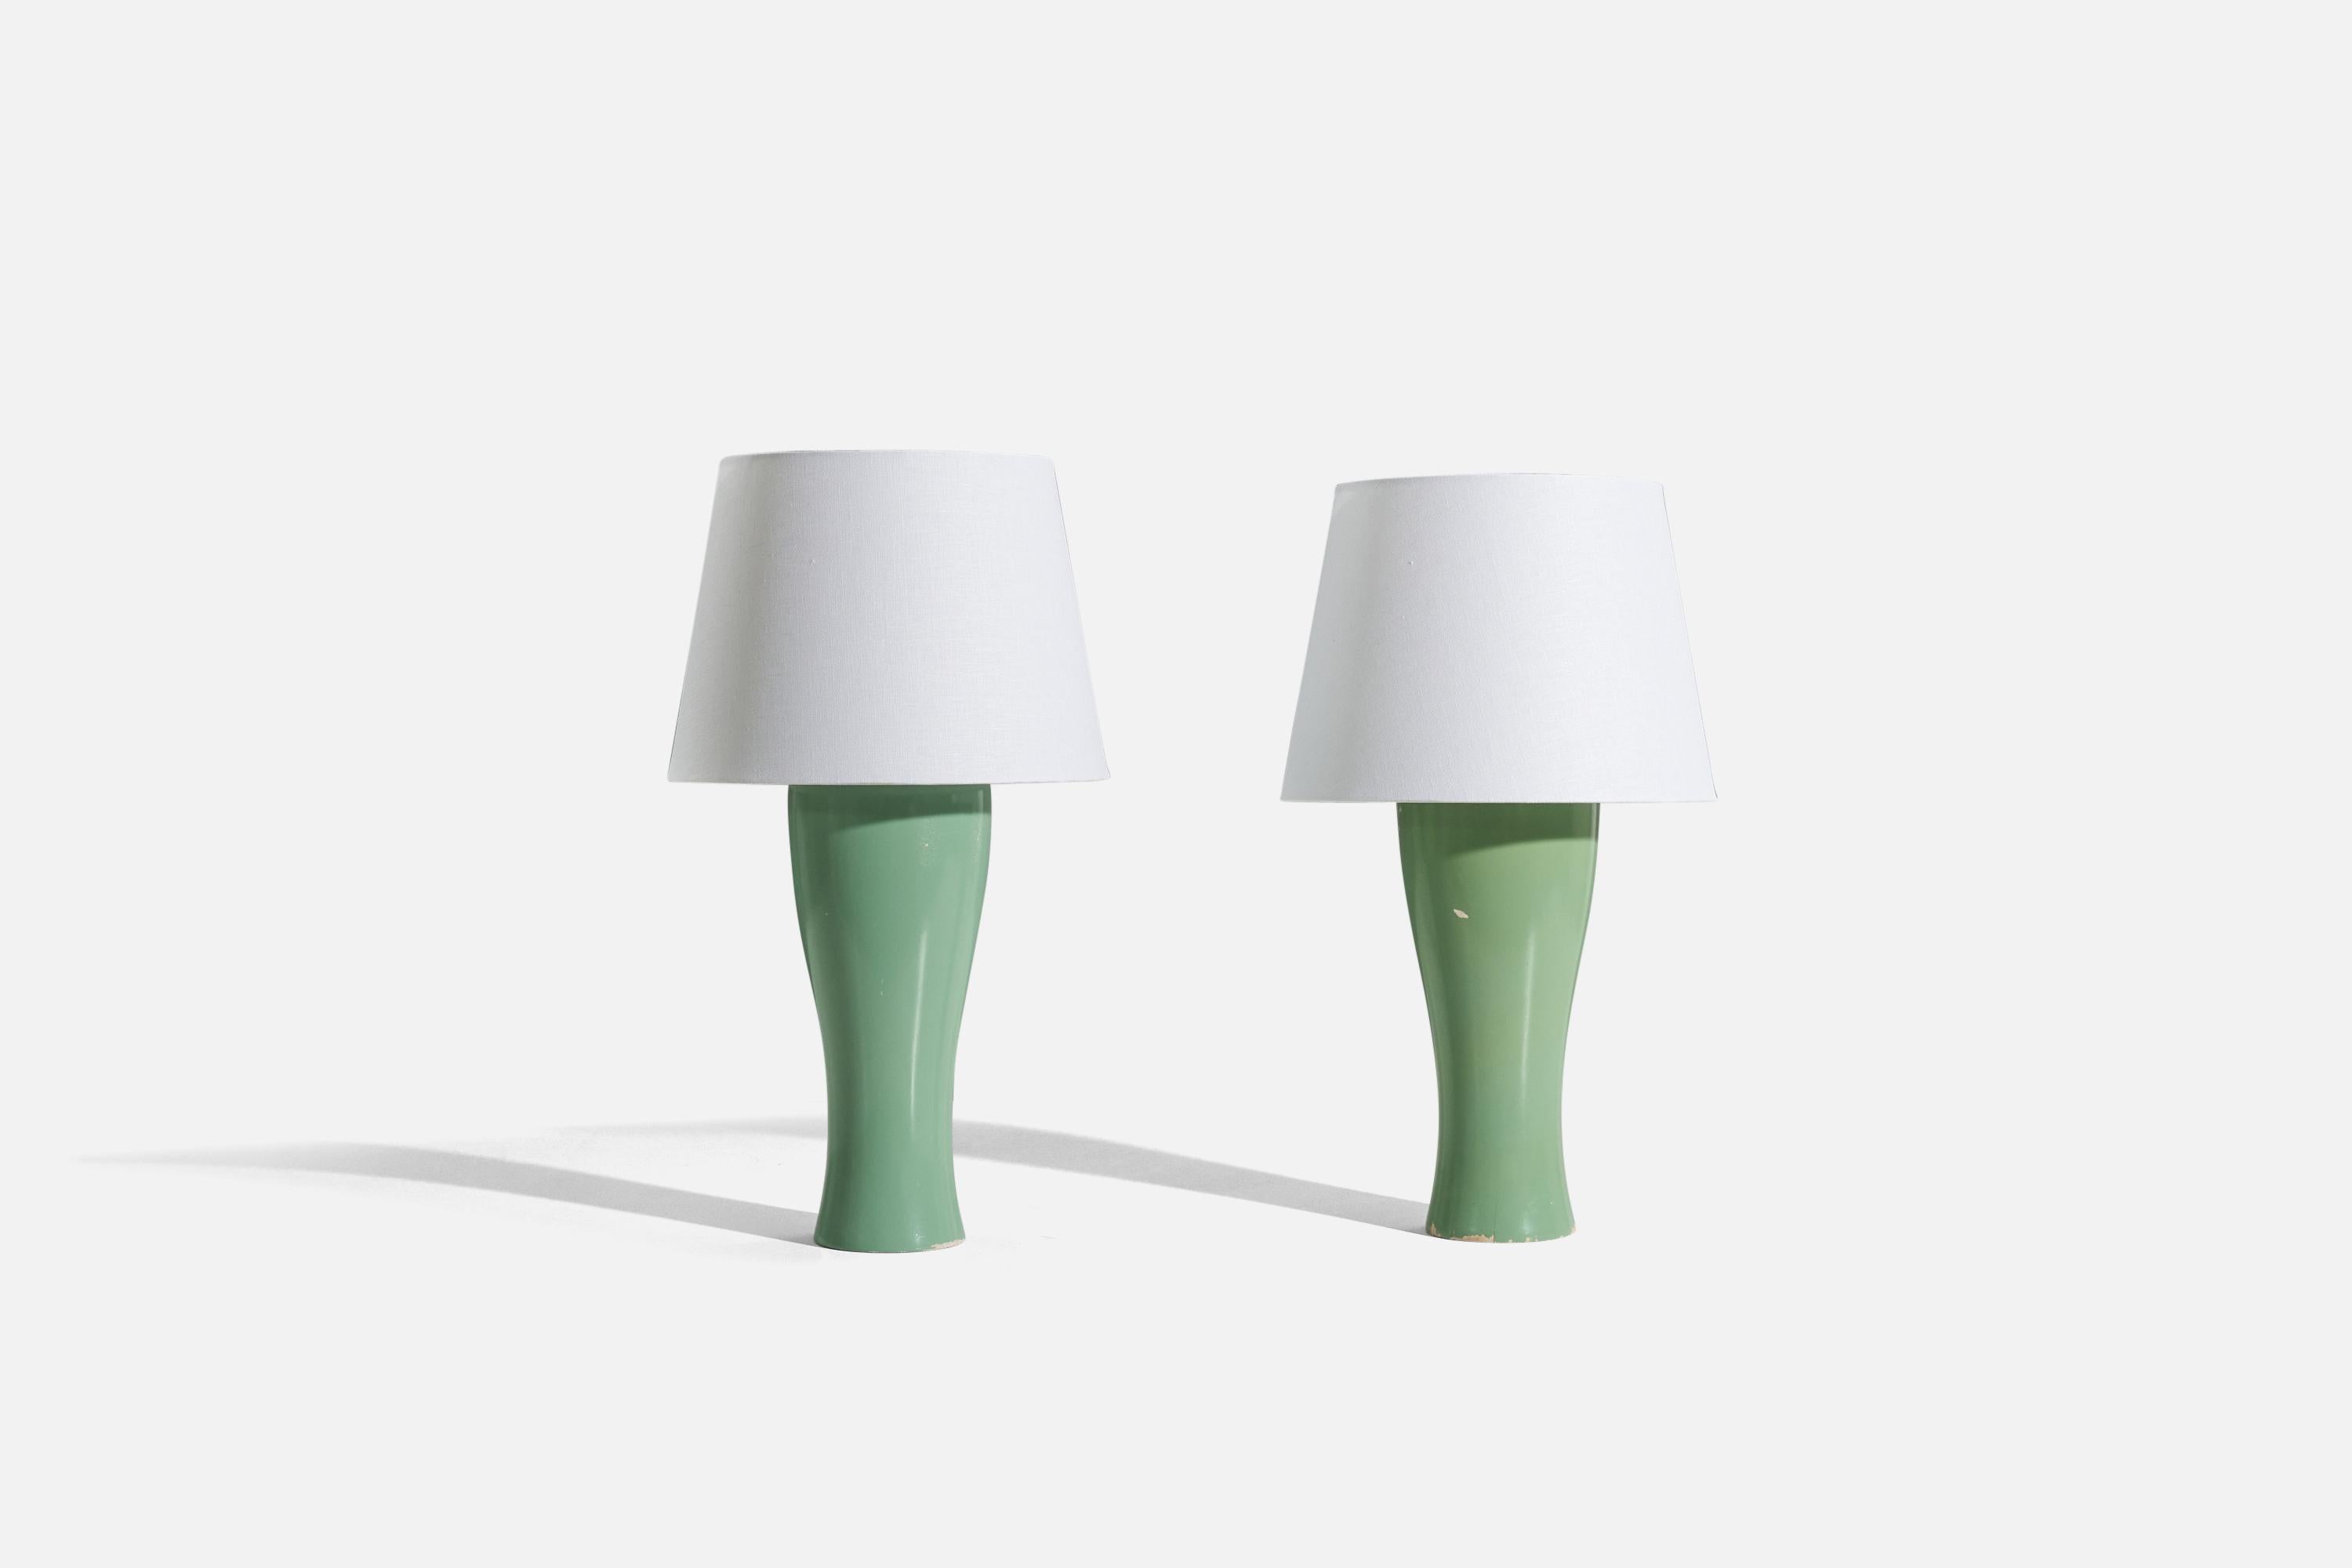 A pair of green lacquered wooden table lamps, designed and produced by a Swedish designer, Sweden, c. 1970s.

Sold without lampshade. 
Dimensions of lamp (inches) : 17.1875 x 5.25 x 5.25 (H x W x D)
Dimensions of shade (inches) : 9.125 x 12.125